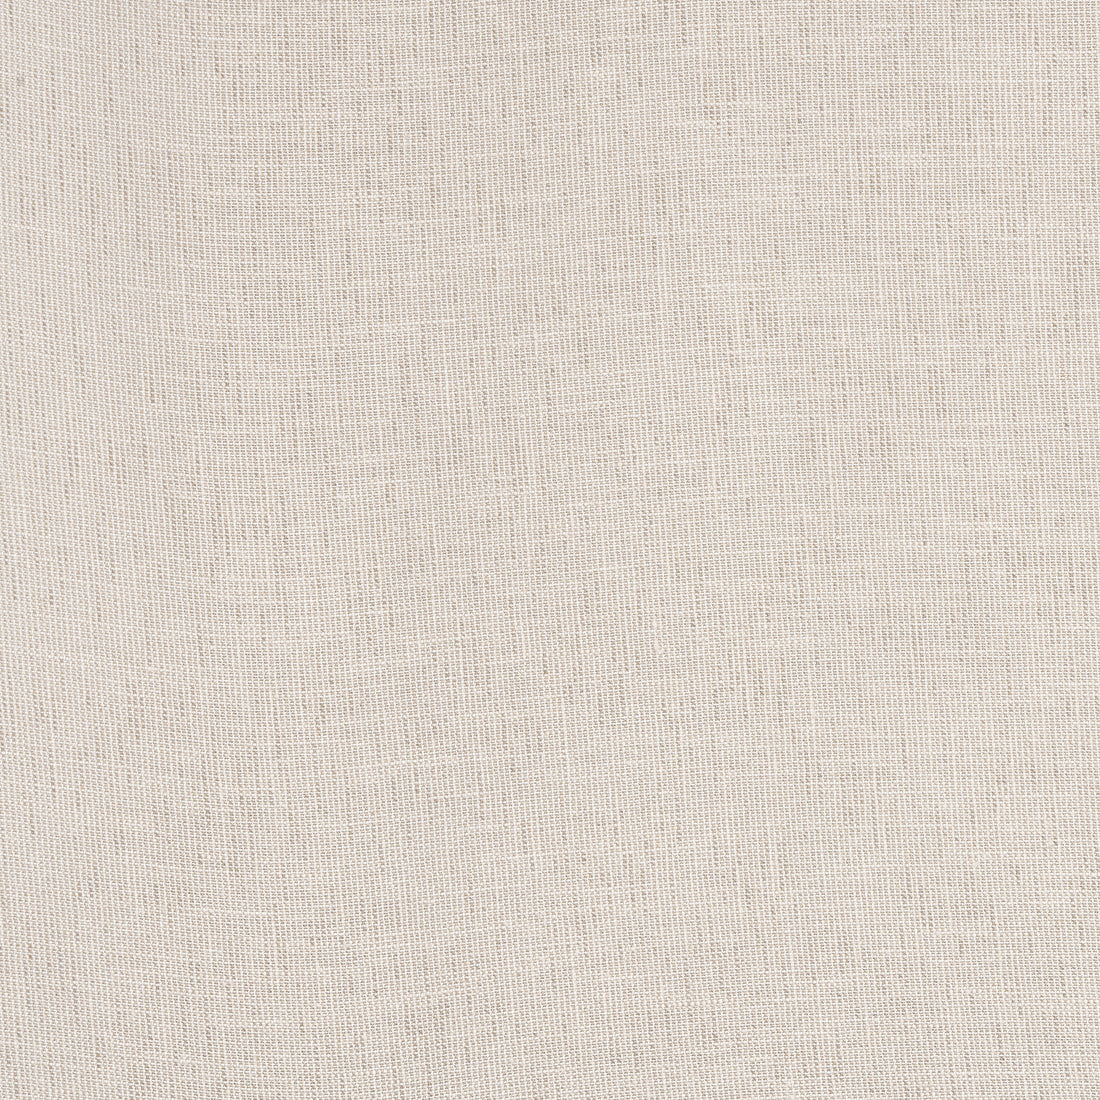 Ottawa fabric in smoke color - pattern number FWW8246 - by Thibaut in the Aura collection